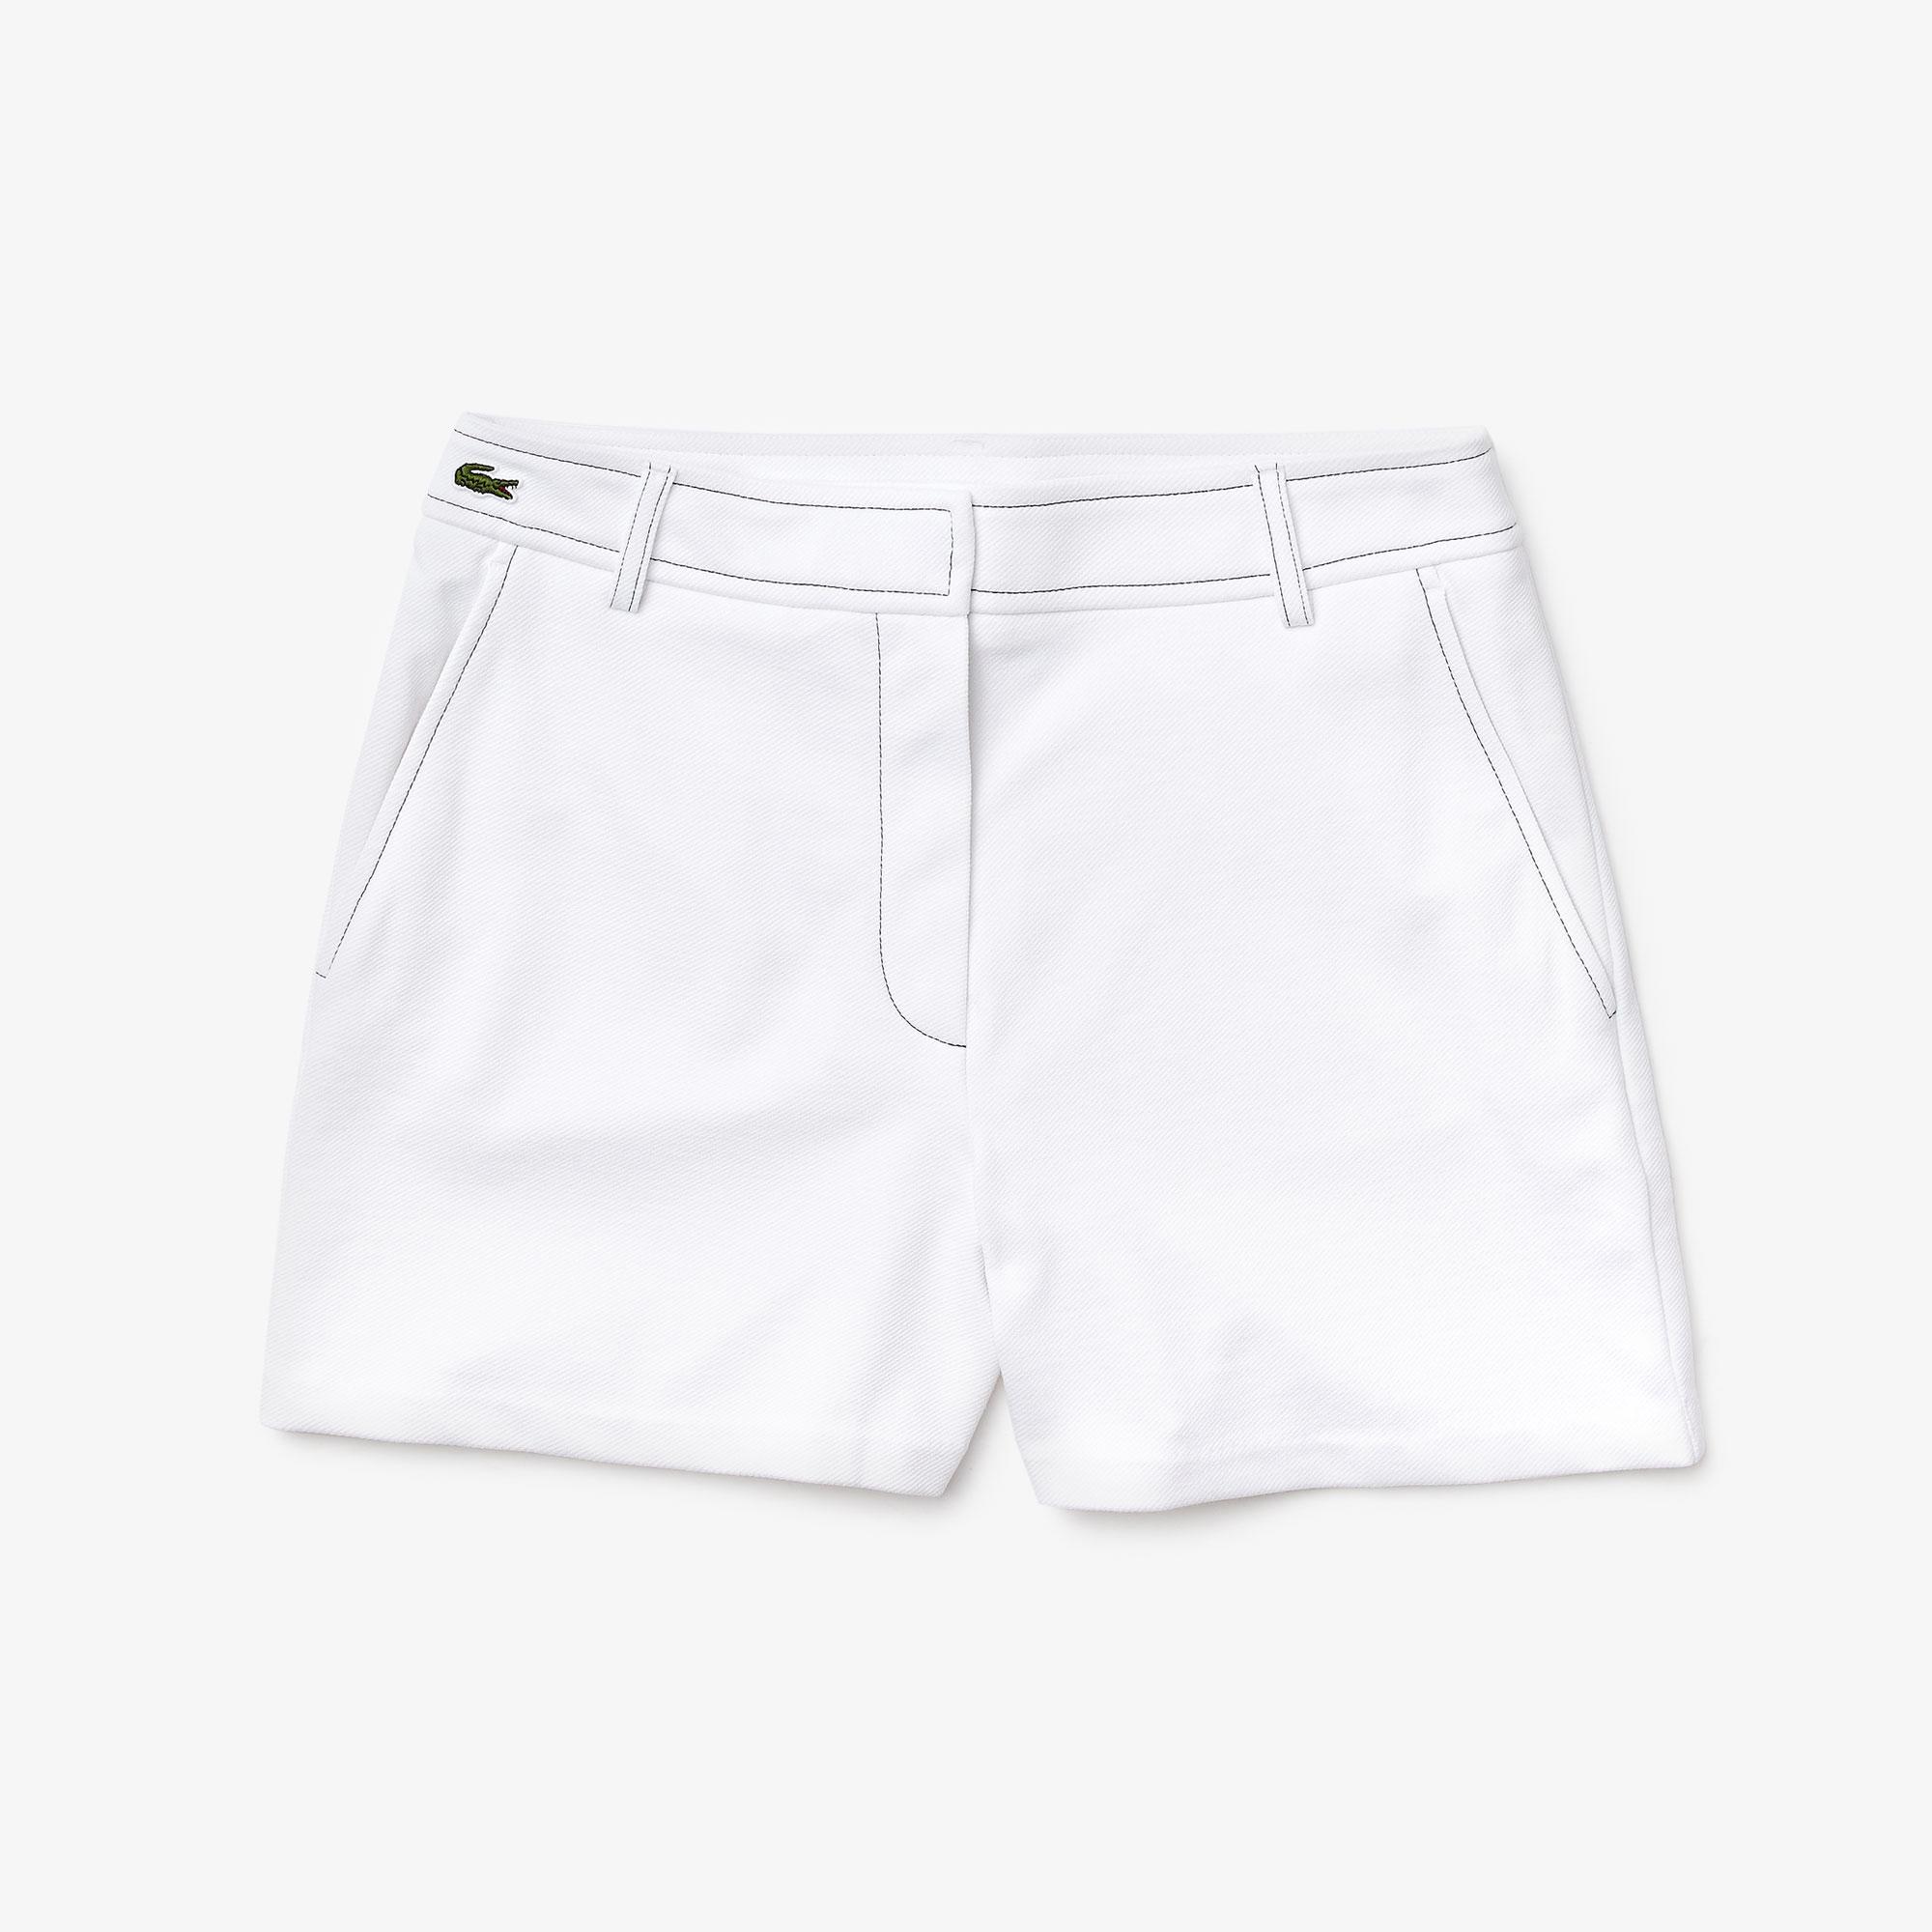 lacoste womens shorts